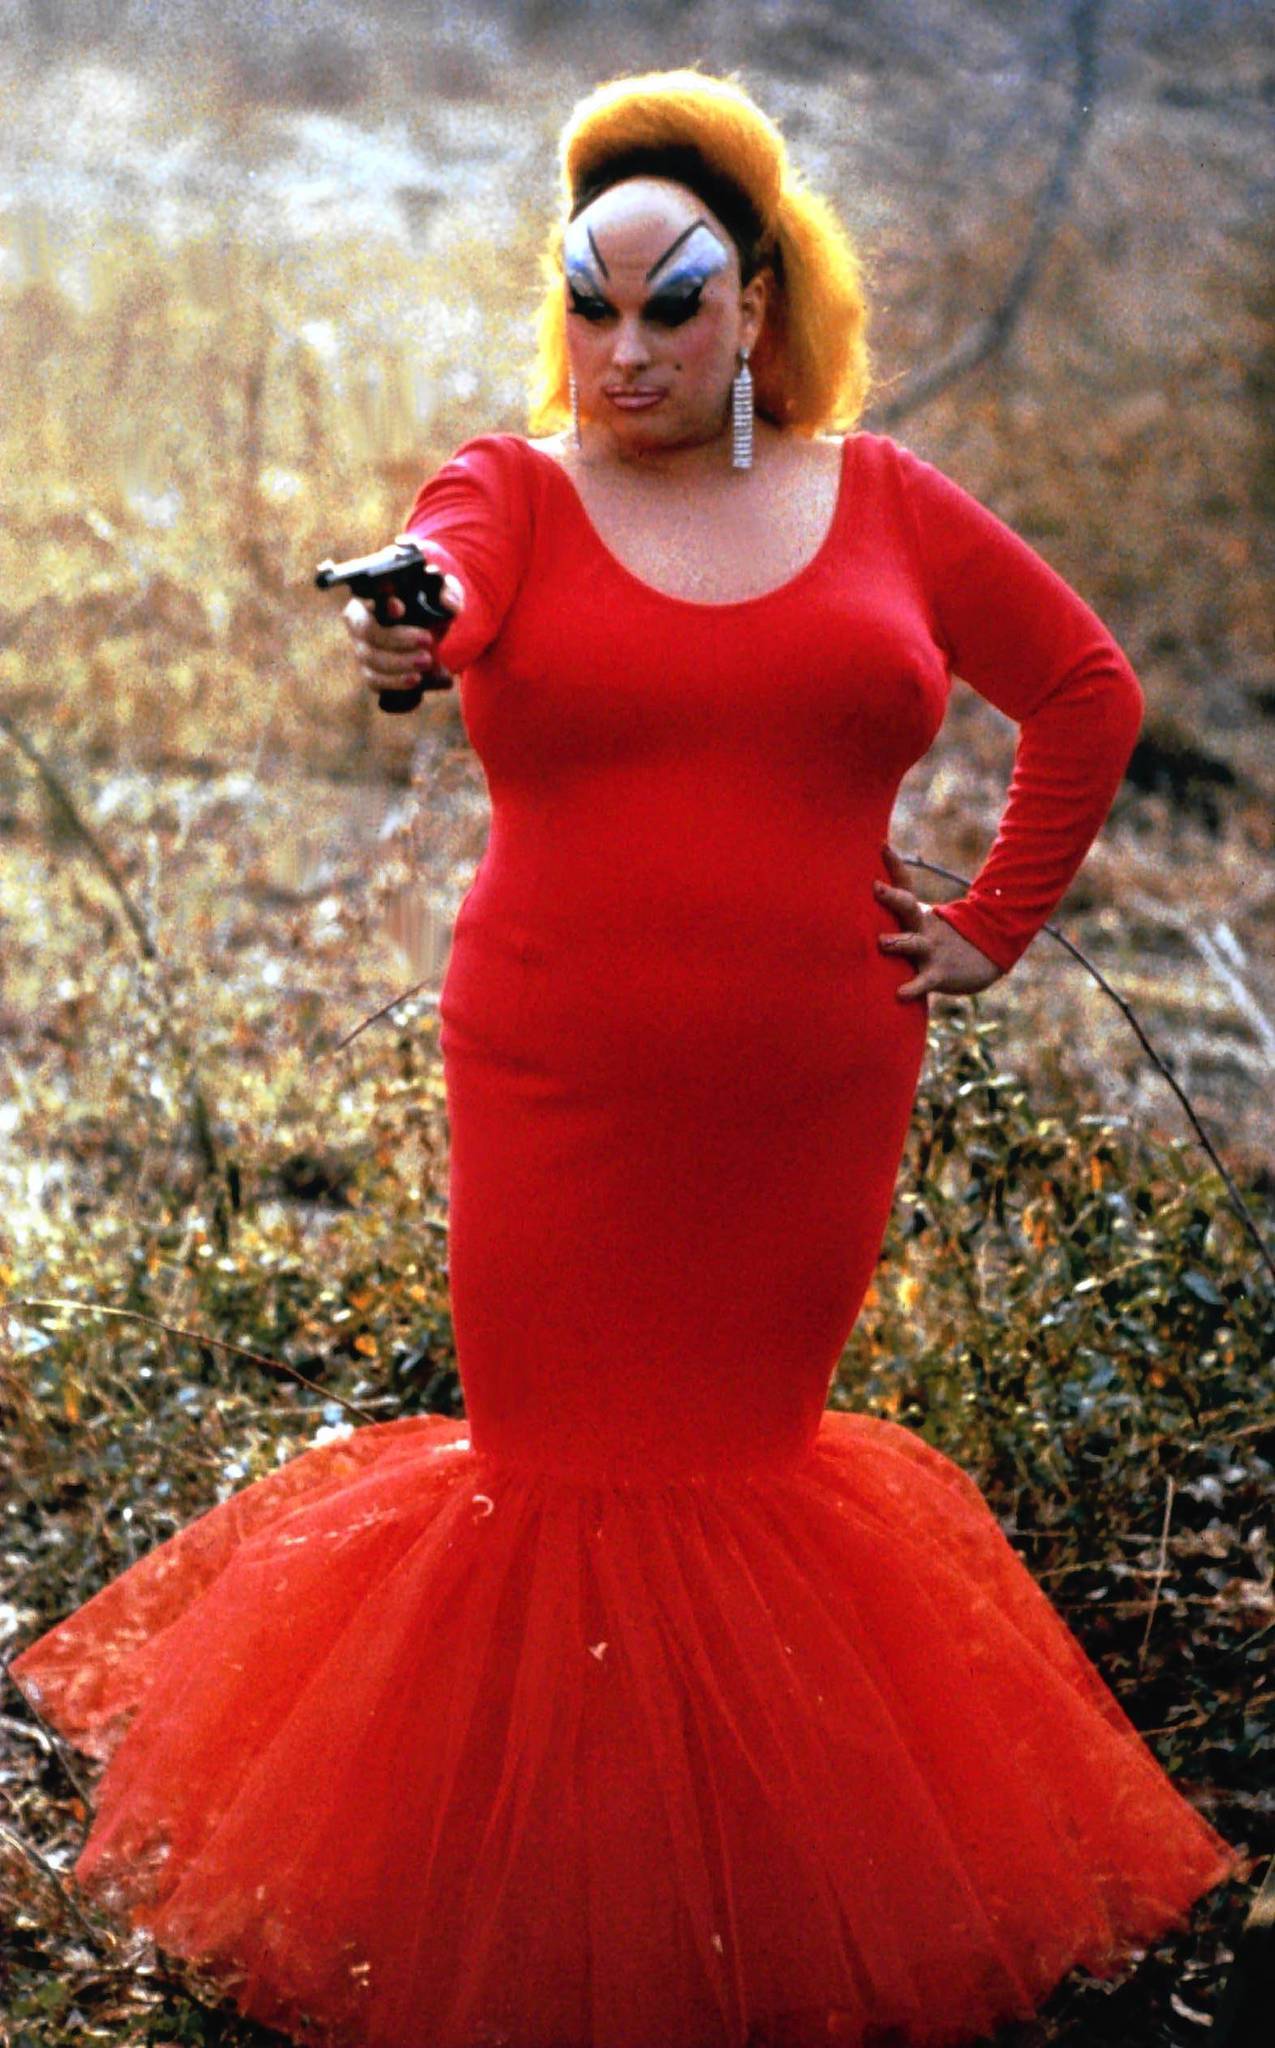 A Tribute to Divine, Hollywoods Most Infamous Drag Queen